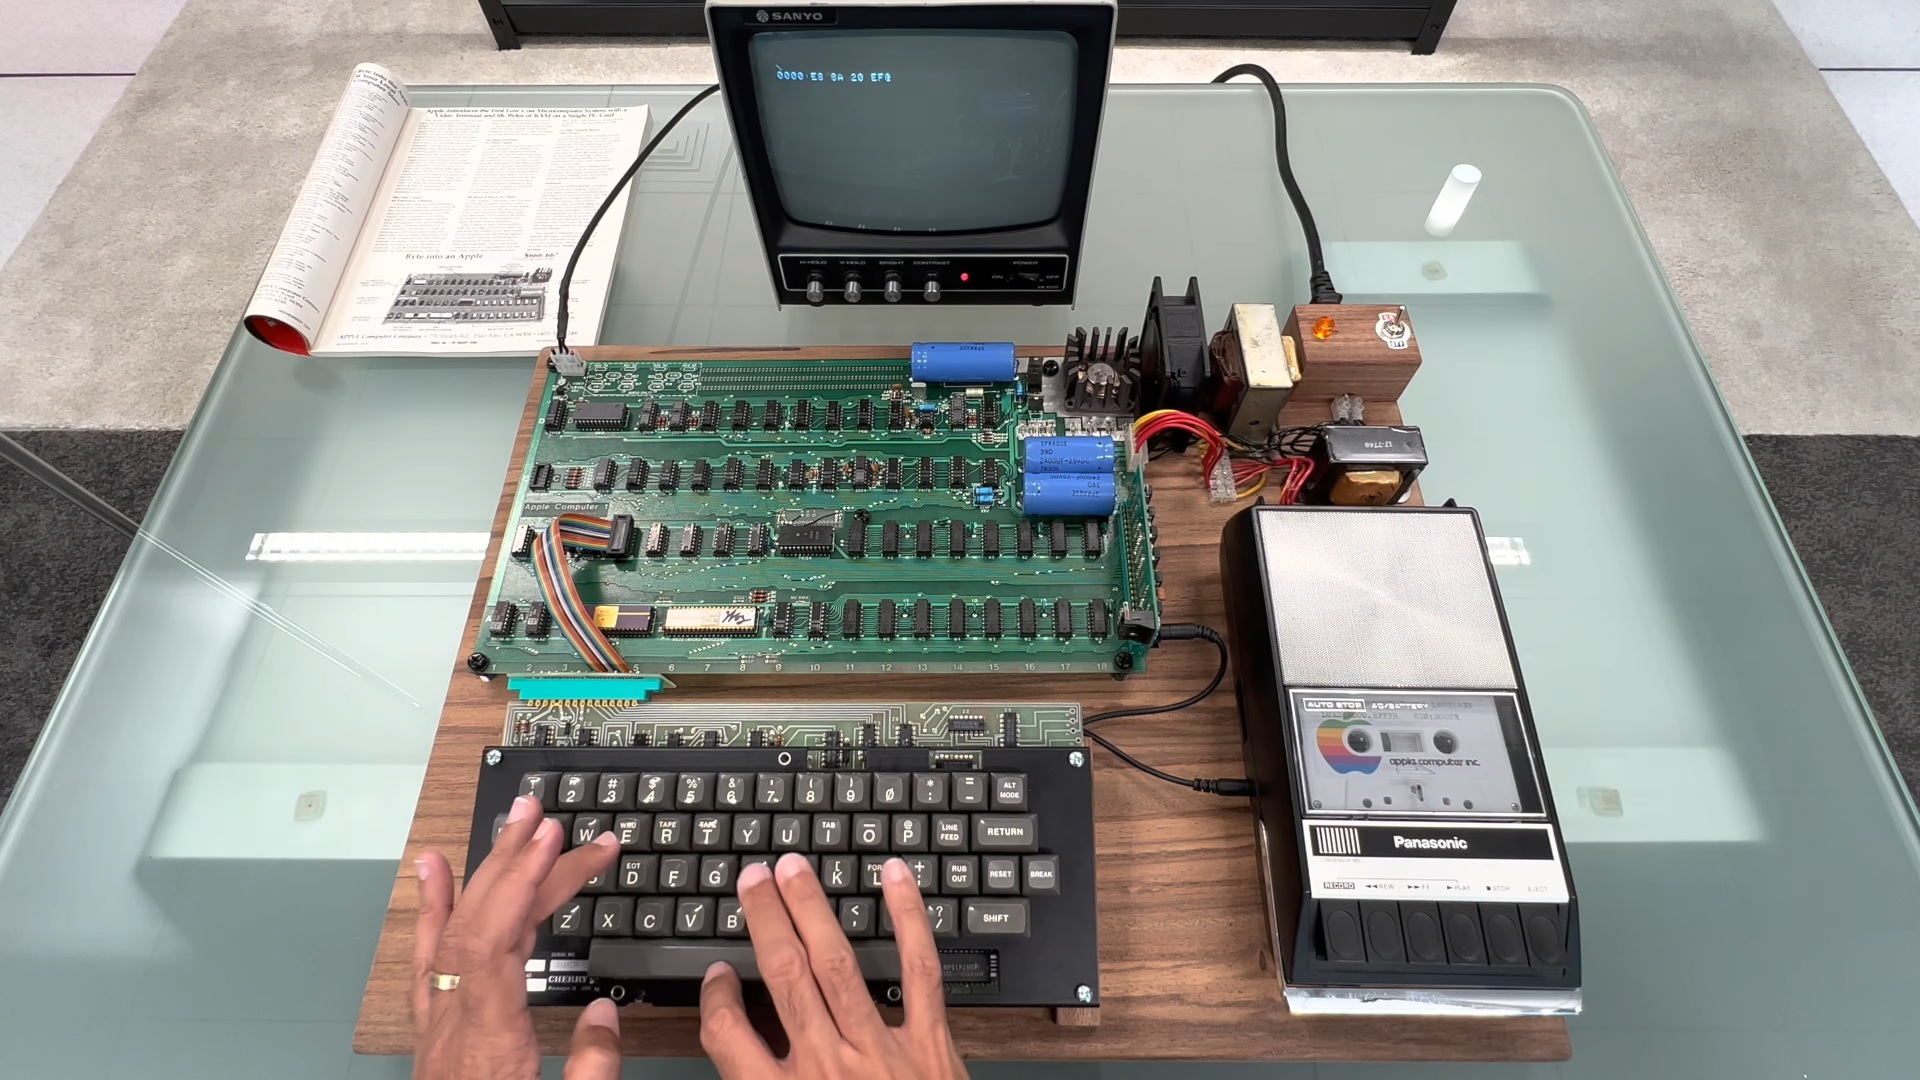 This legendary Apple computer might sell for up to $500,000 - Digital Trends